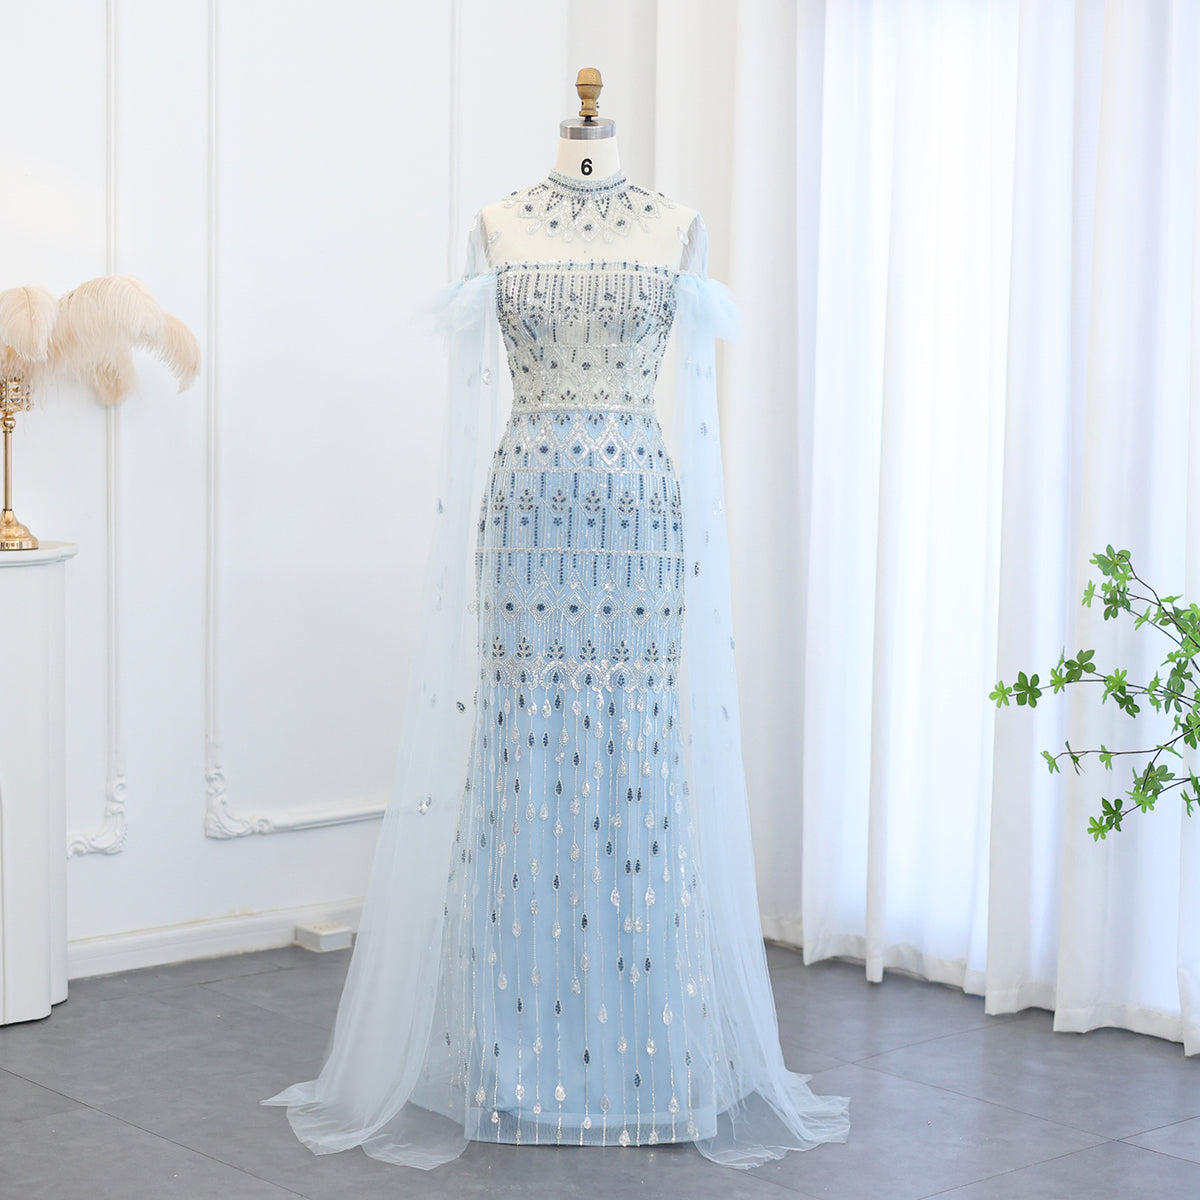 Sharon Said Luxury Arabic Light Blue Mermaid Evening Dress with Cape Sleeves Elegant High Neck Women Wedding Party Gowns SS096